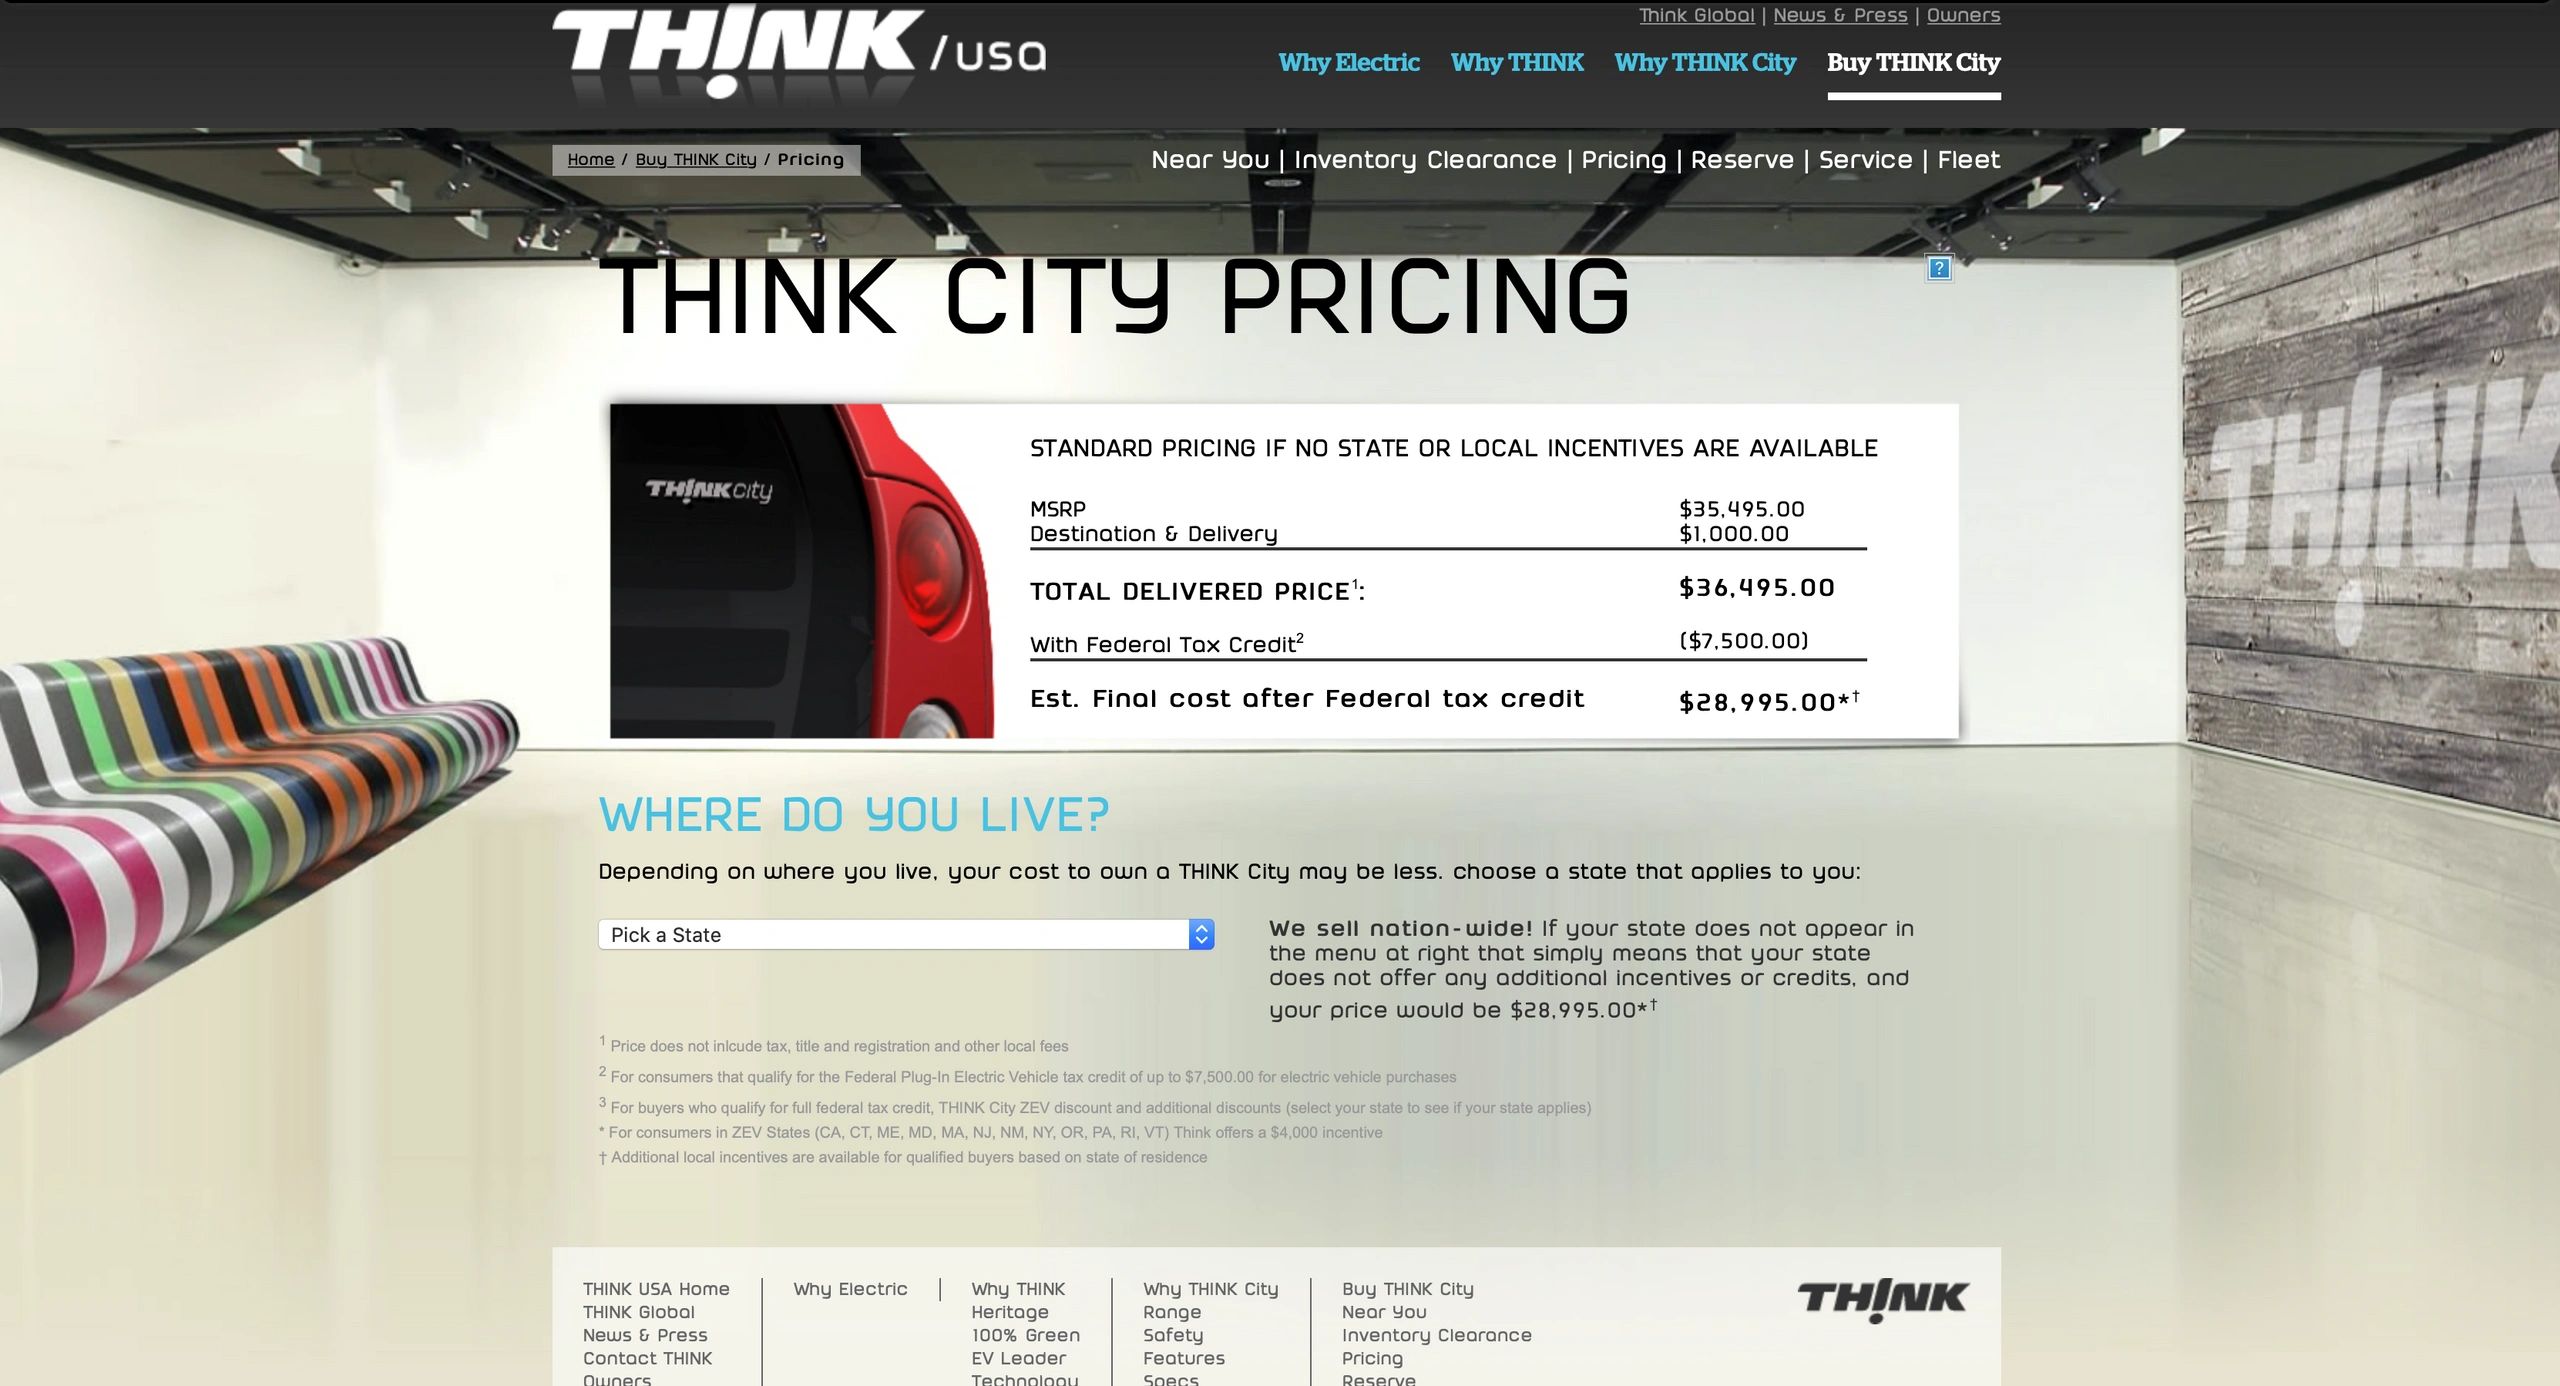 Think City EV launch direct purchase from Think City website, an industry 1st